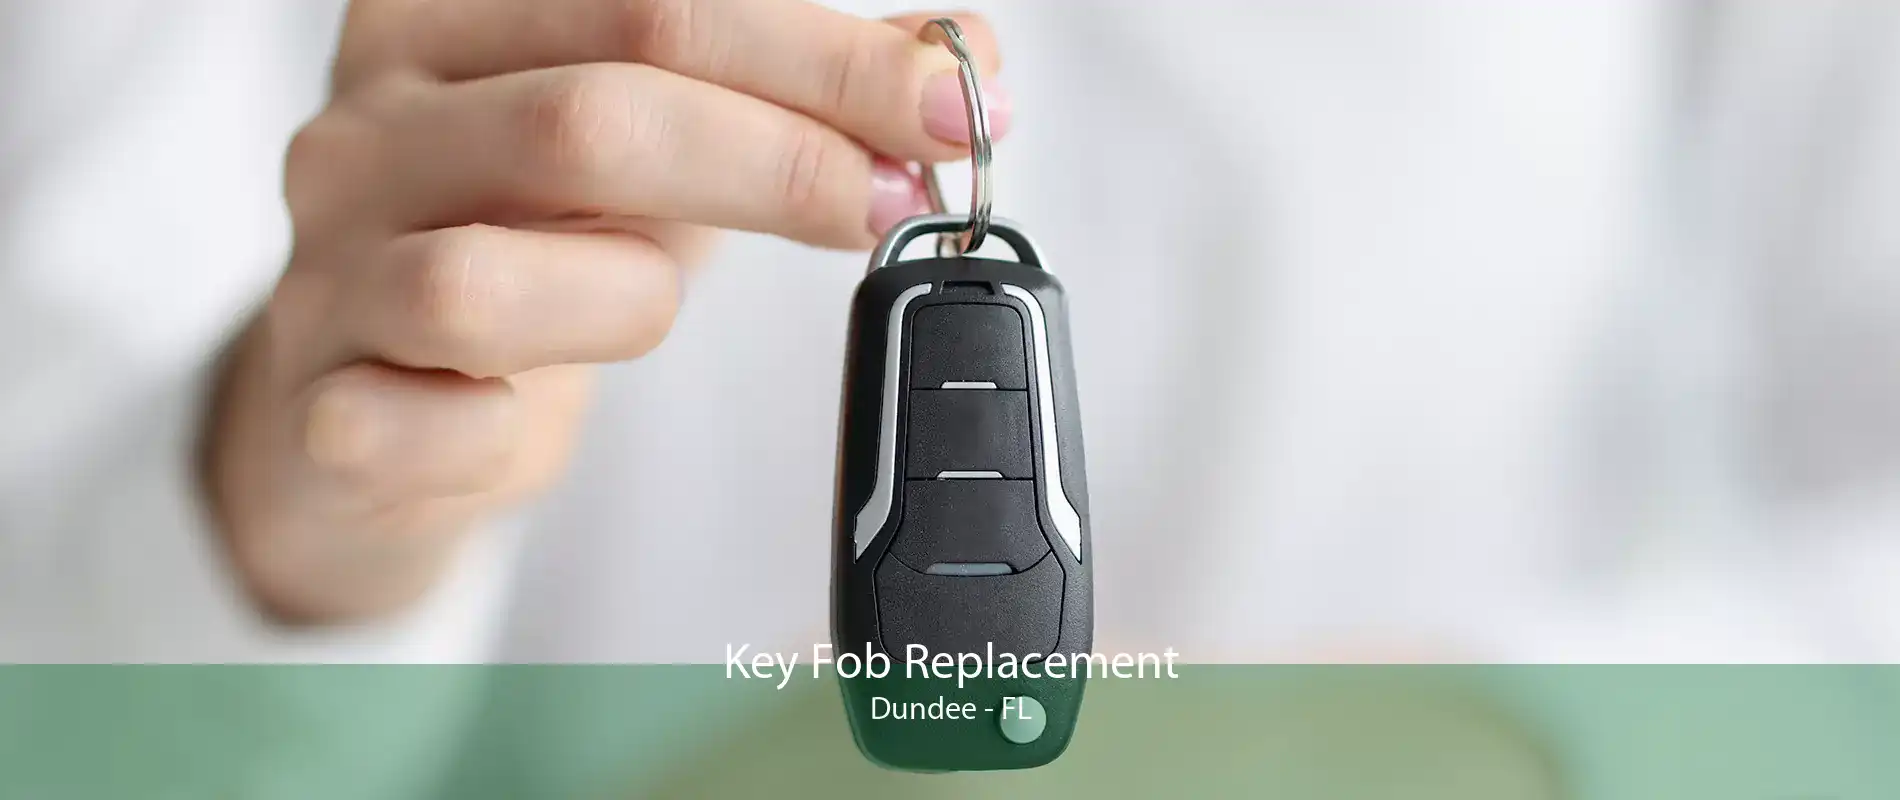 Key Fob Replacement Dundee - FL